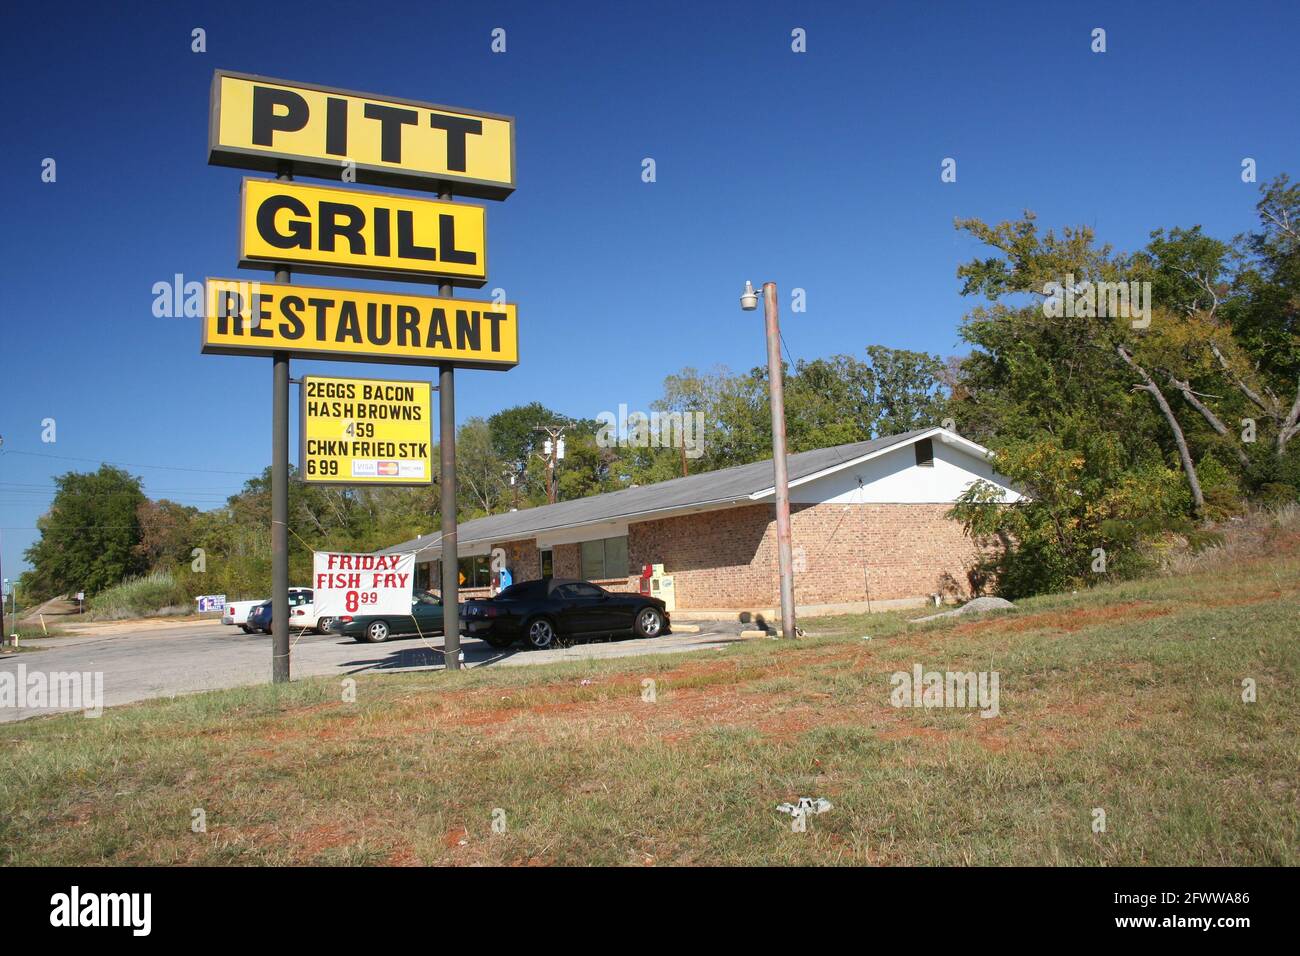 Historic Pitt Grill Restaurant and sign located in Palestine, TX Stock  Photo - Alamy